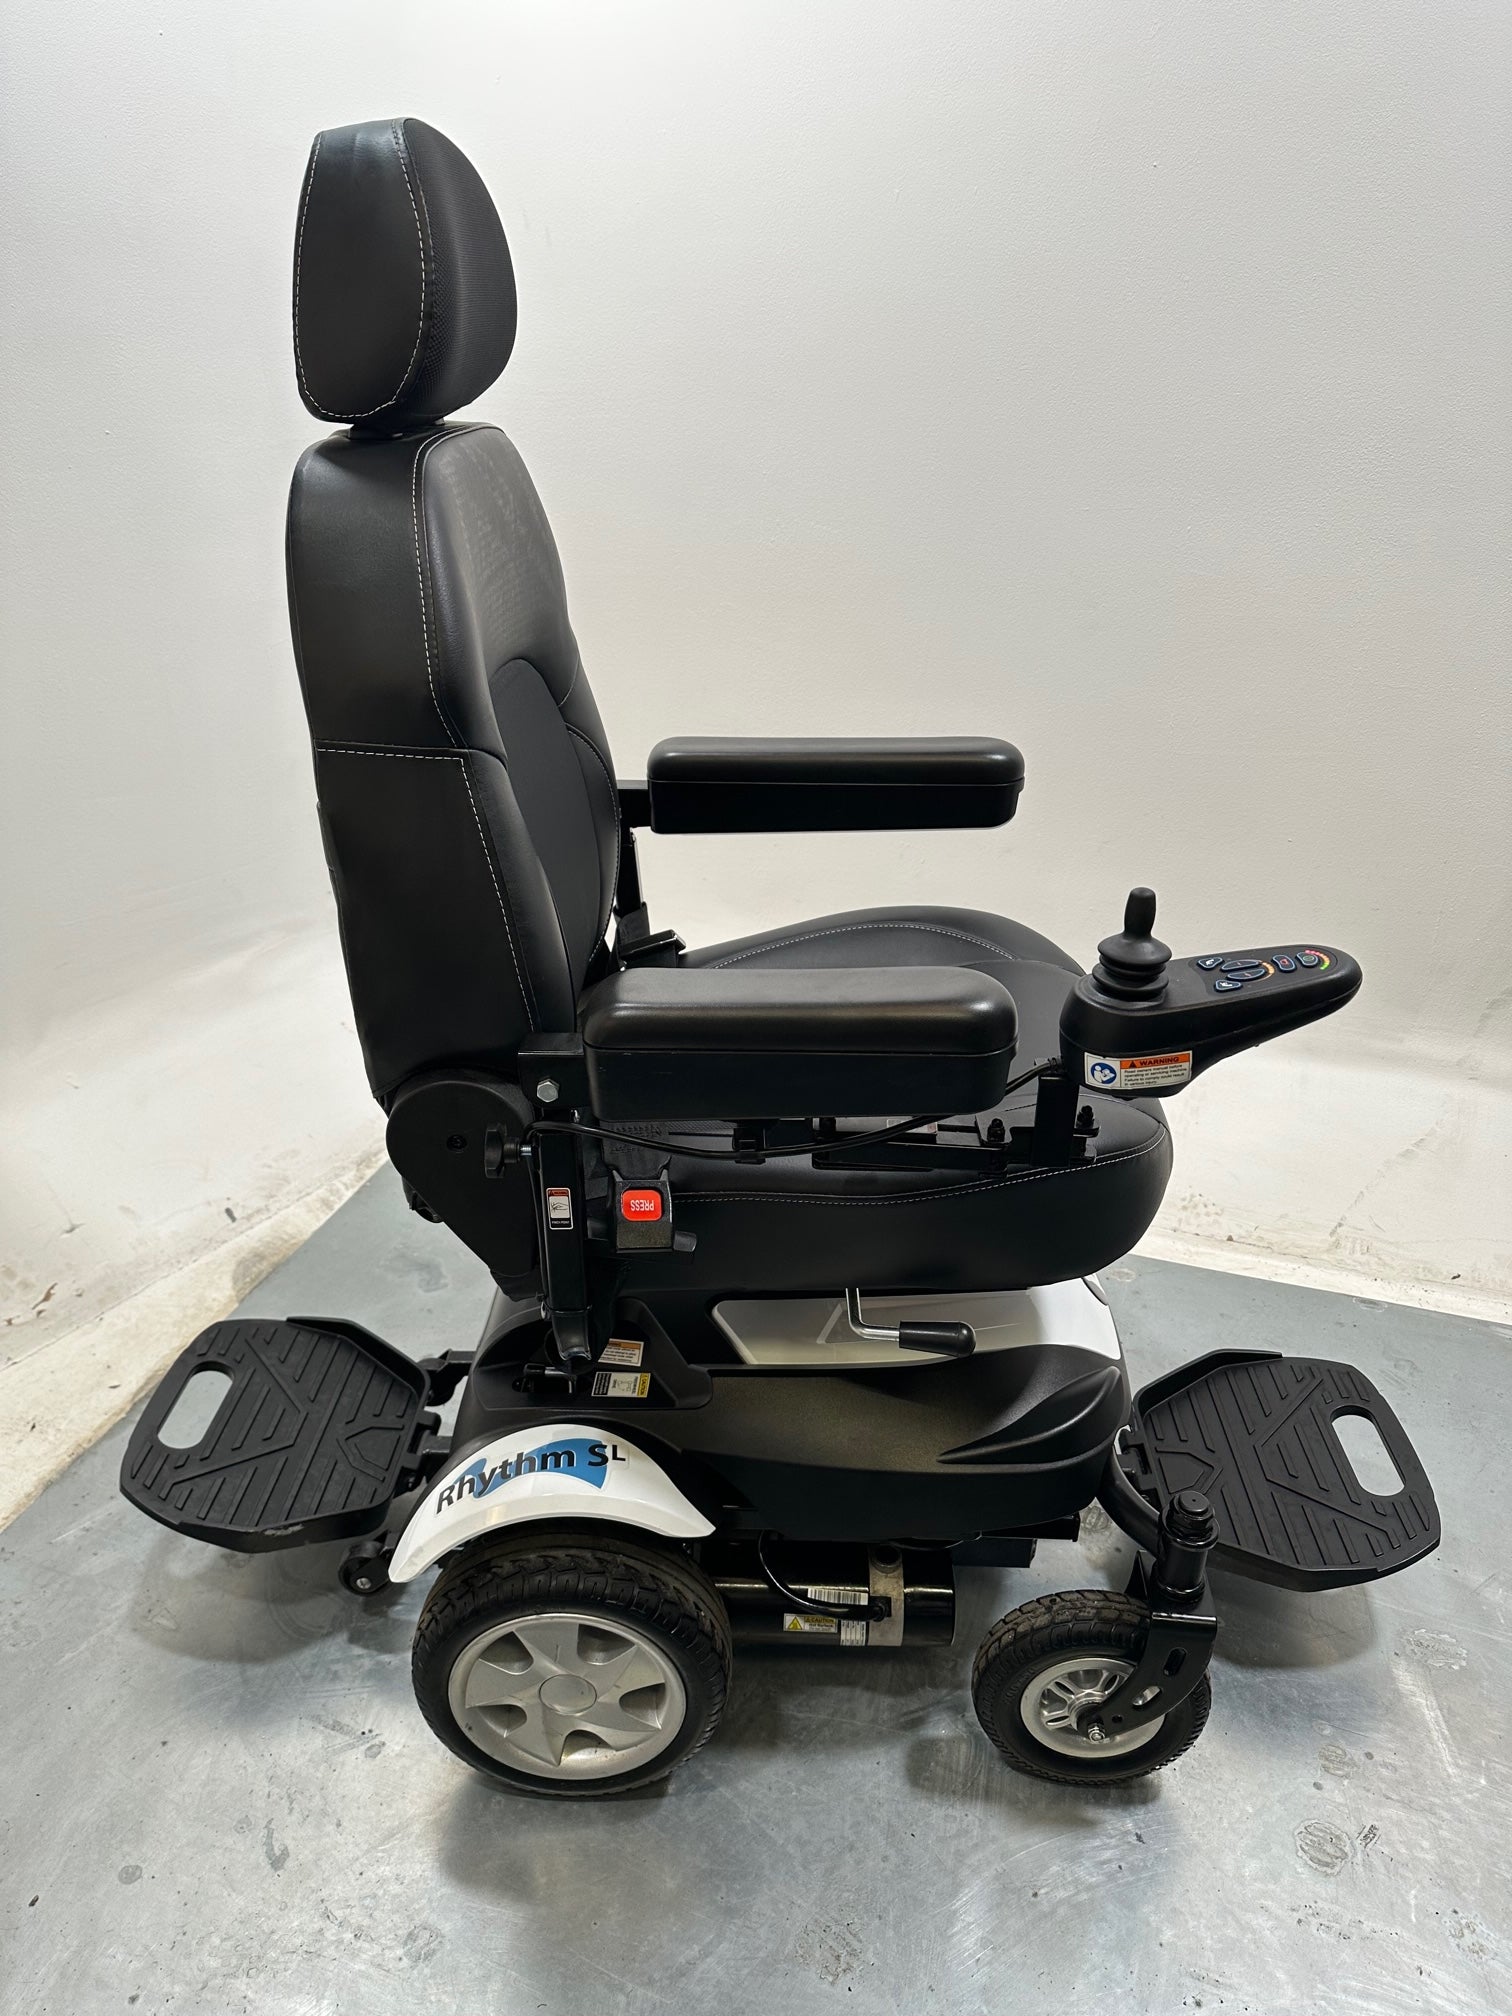 RASCAL RHYTHM SL POWERCHAIR WITH SEAT RAISER AND TURNABOUT EXCELLENT CONDITION